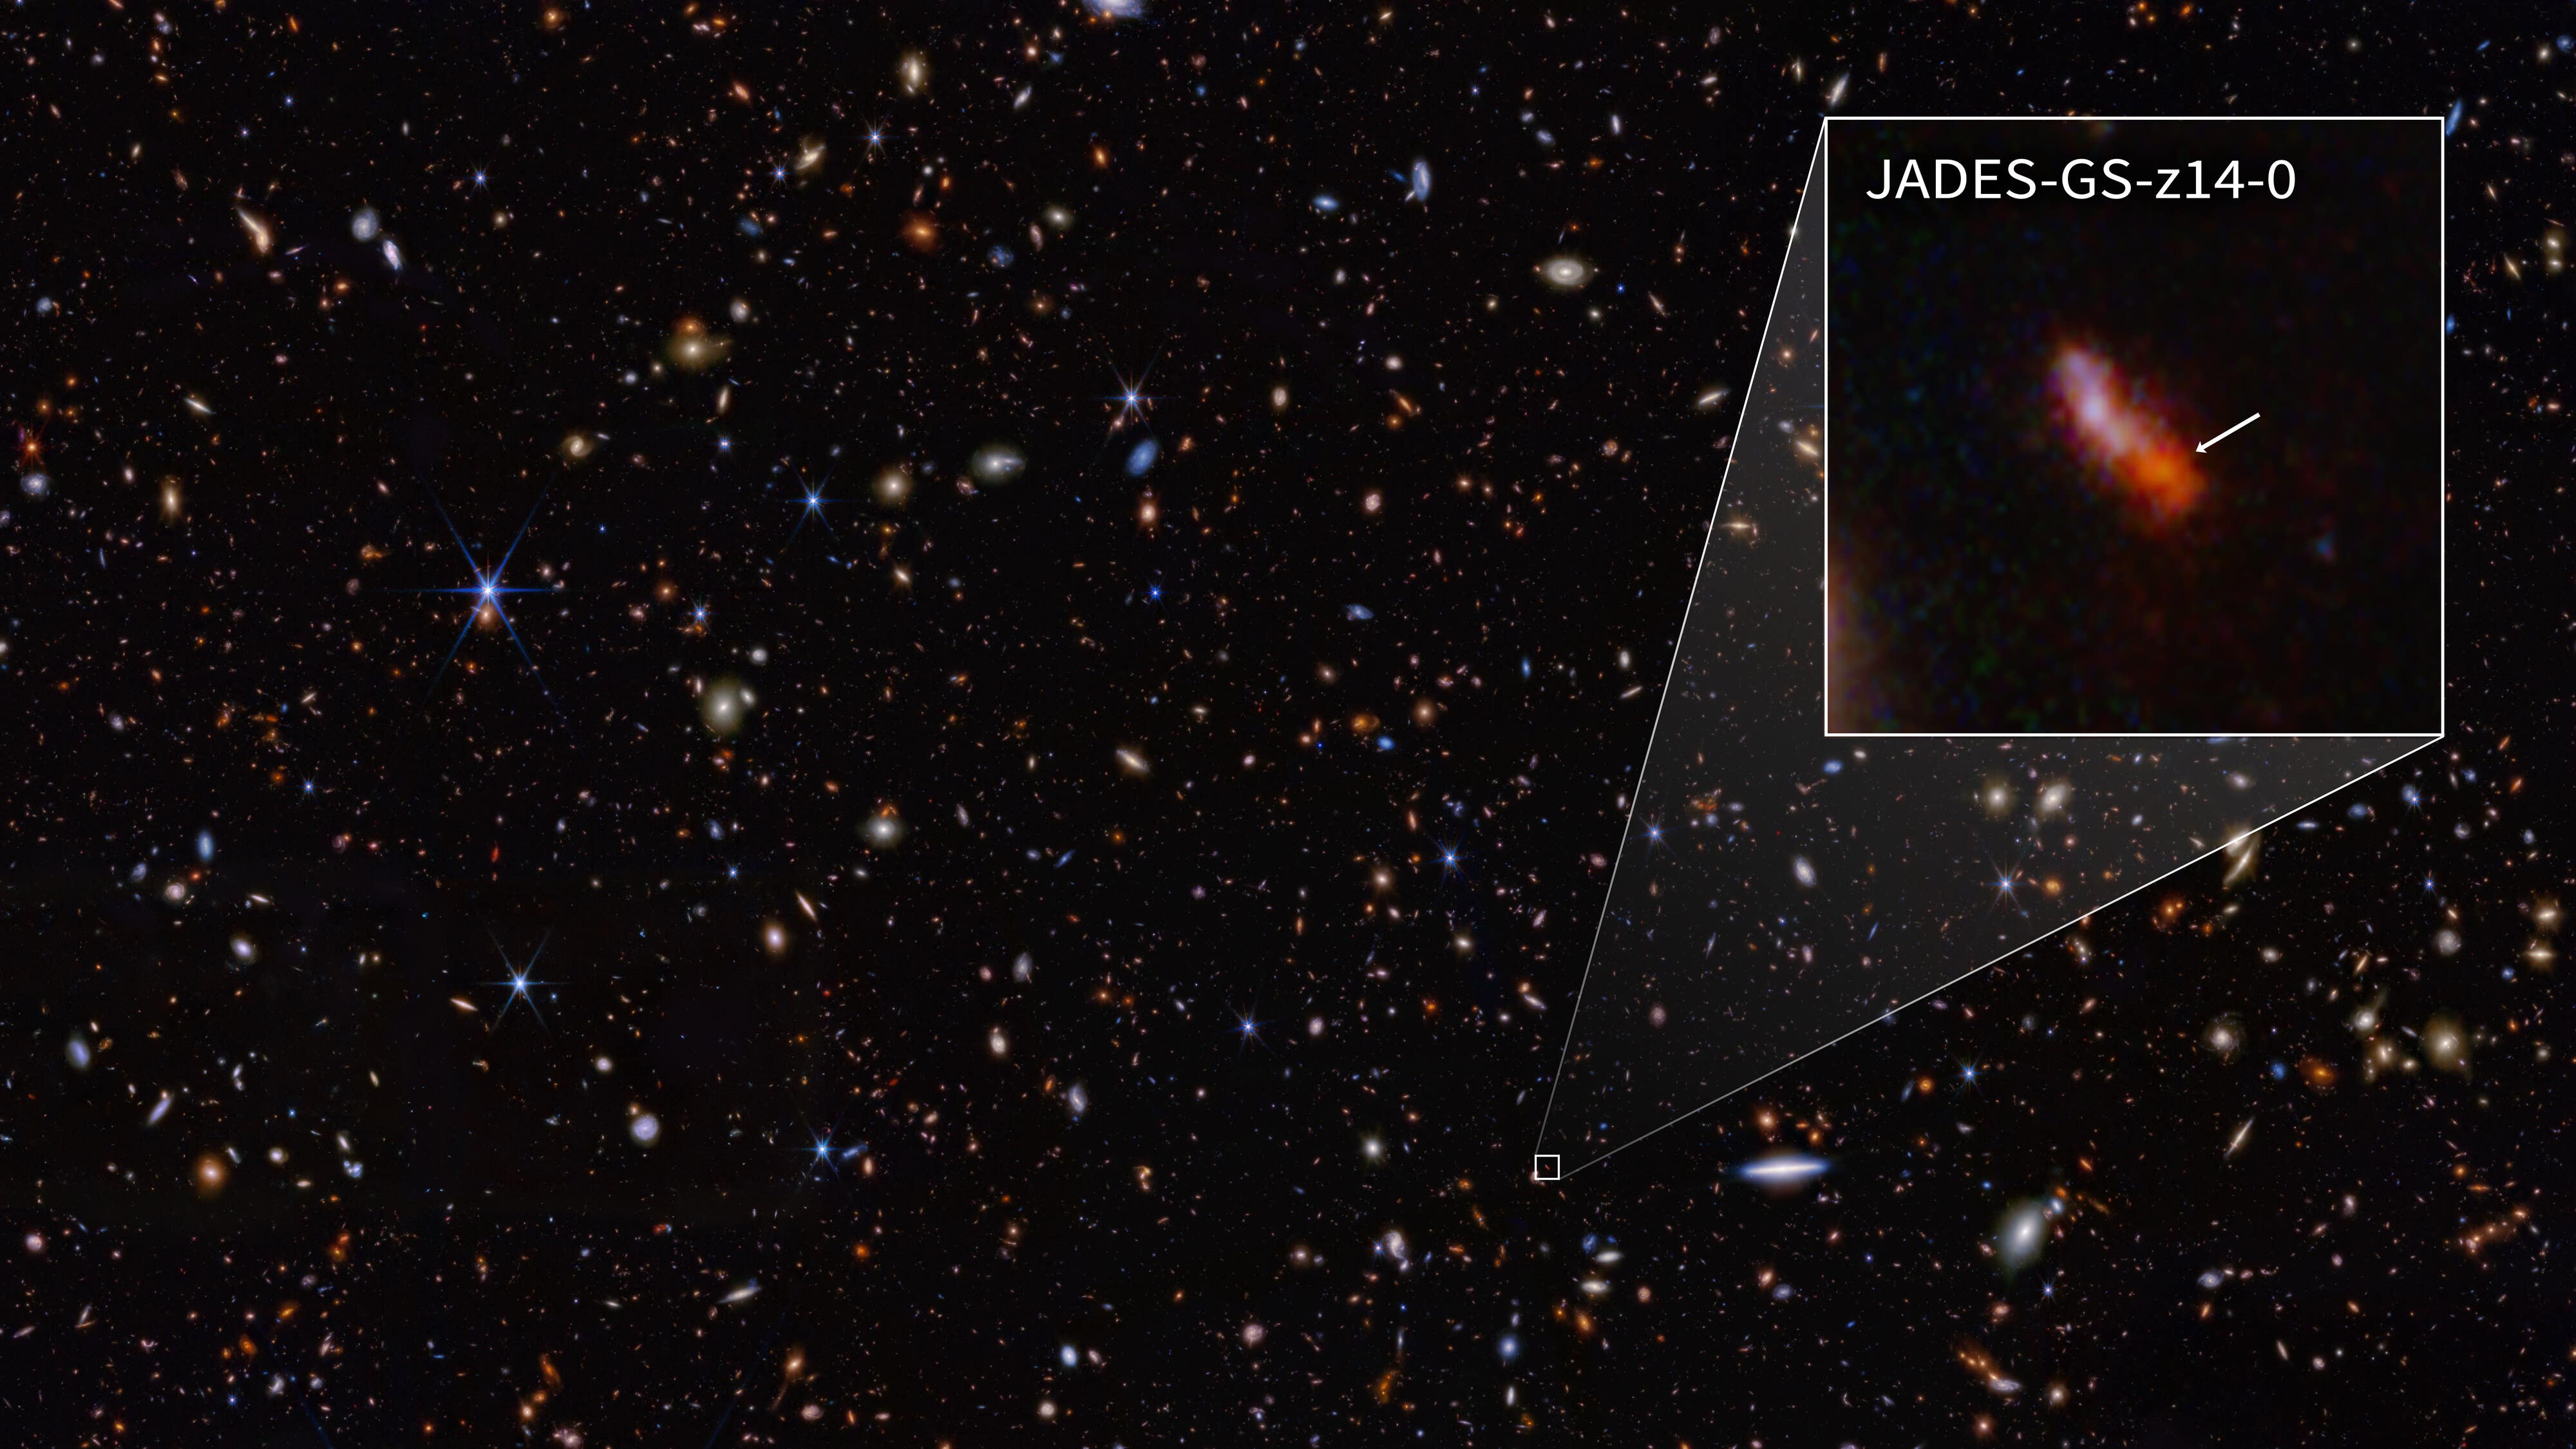 James Webb Space Telescope spots earliest and most distant galaxies ever seen